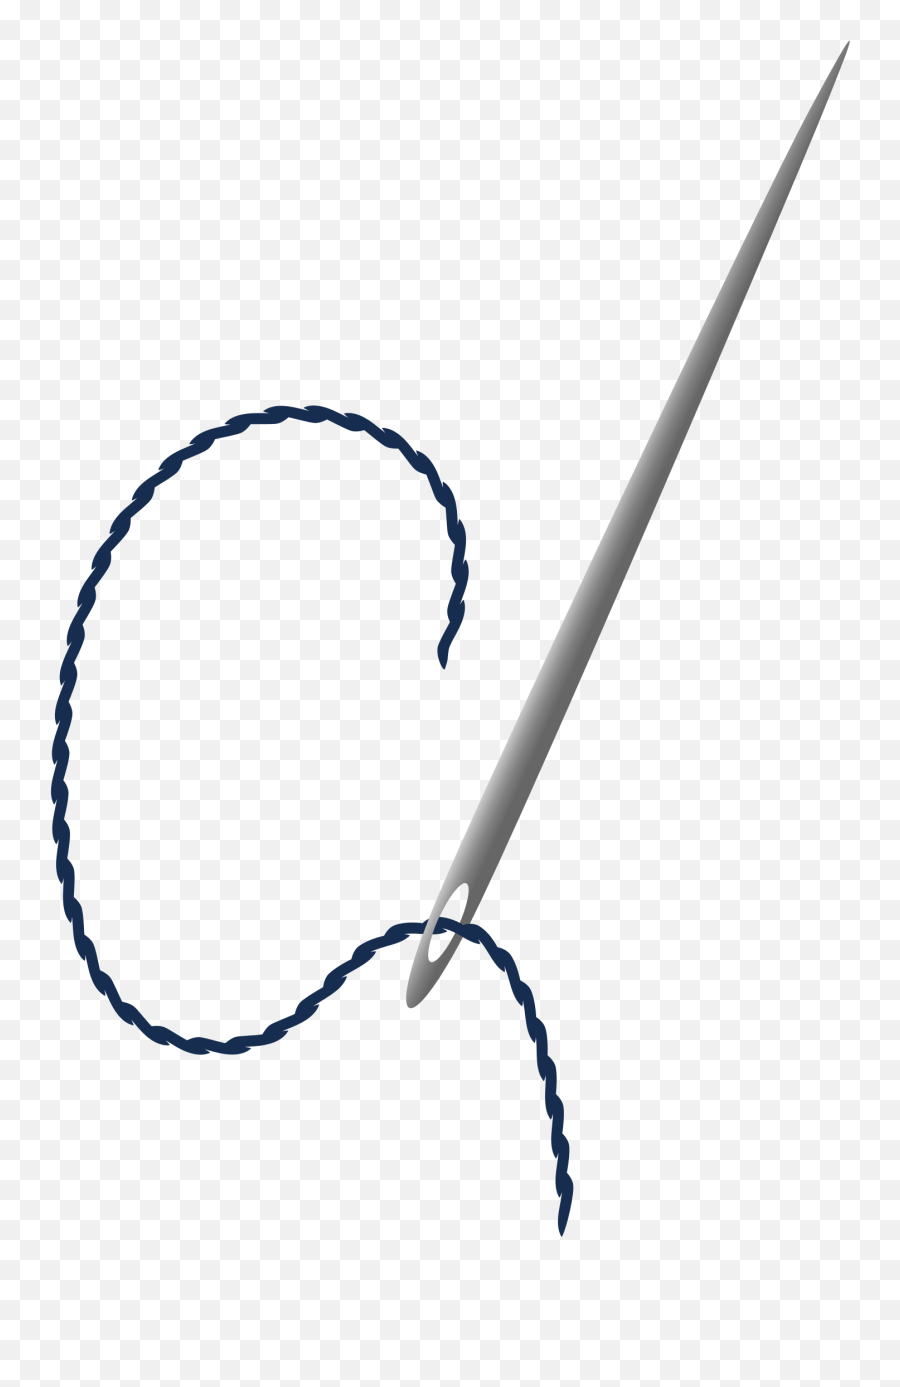 Needle - Sewing Needle With Thread Png Clipart Full Size Draw Needle And Thread,Sewing Needle Png